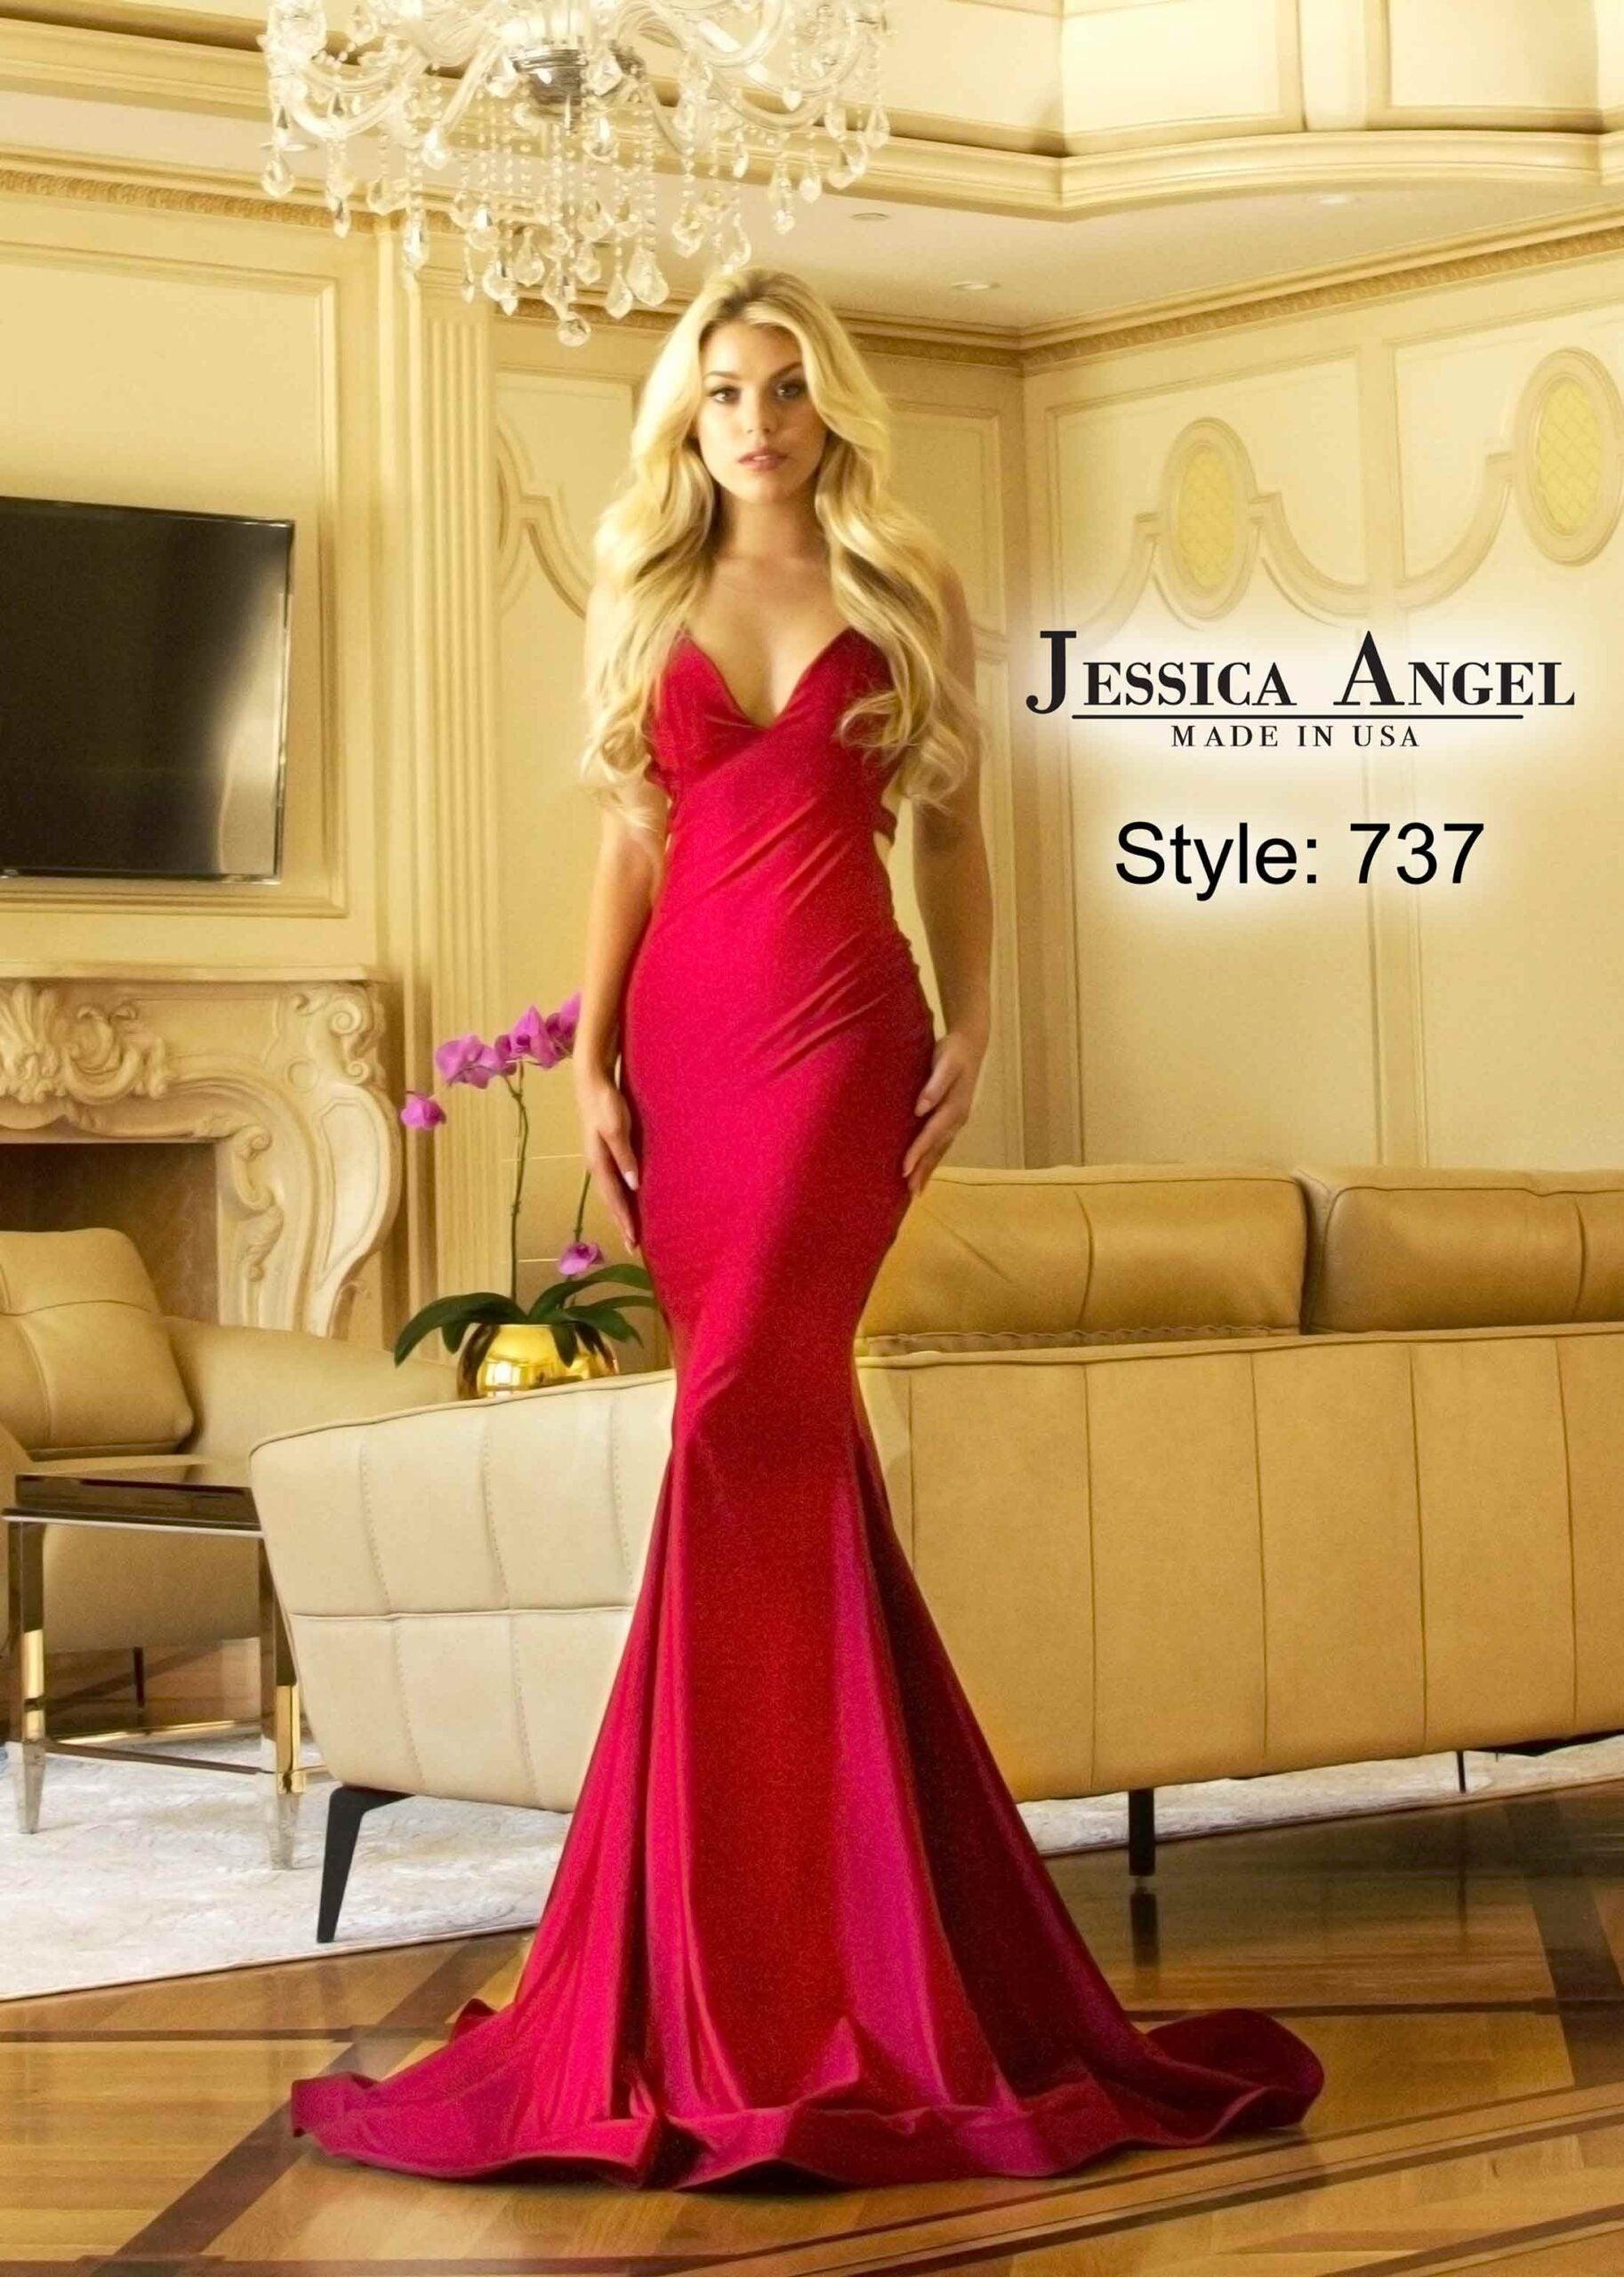 Jessica Angel Sleeveless Long Formal Gown 737 - The Dress Outlet